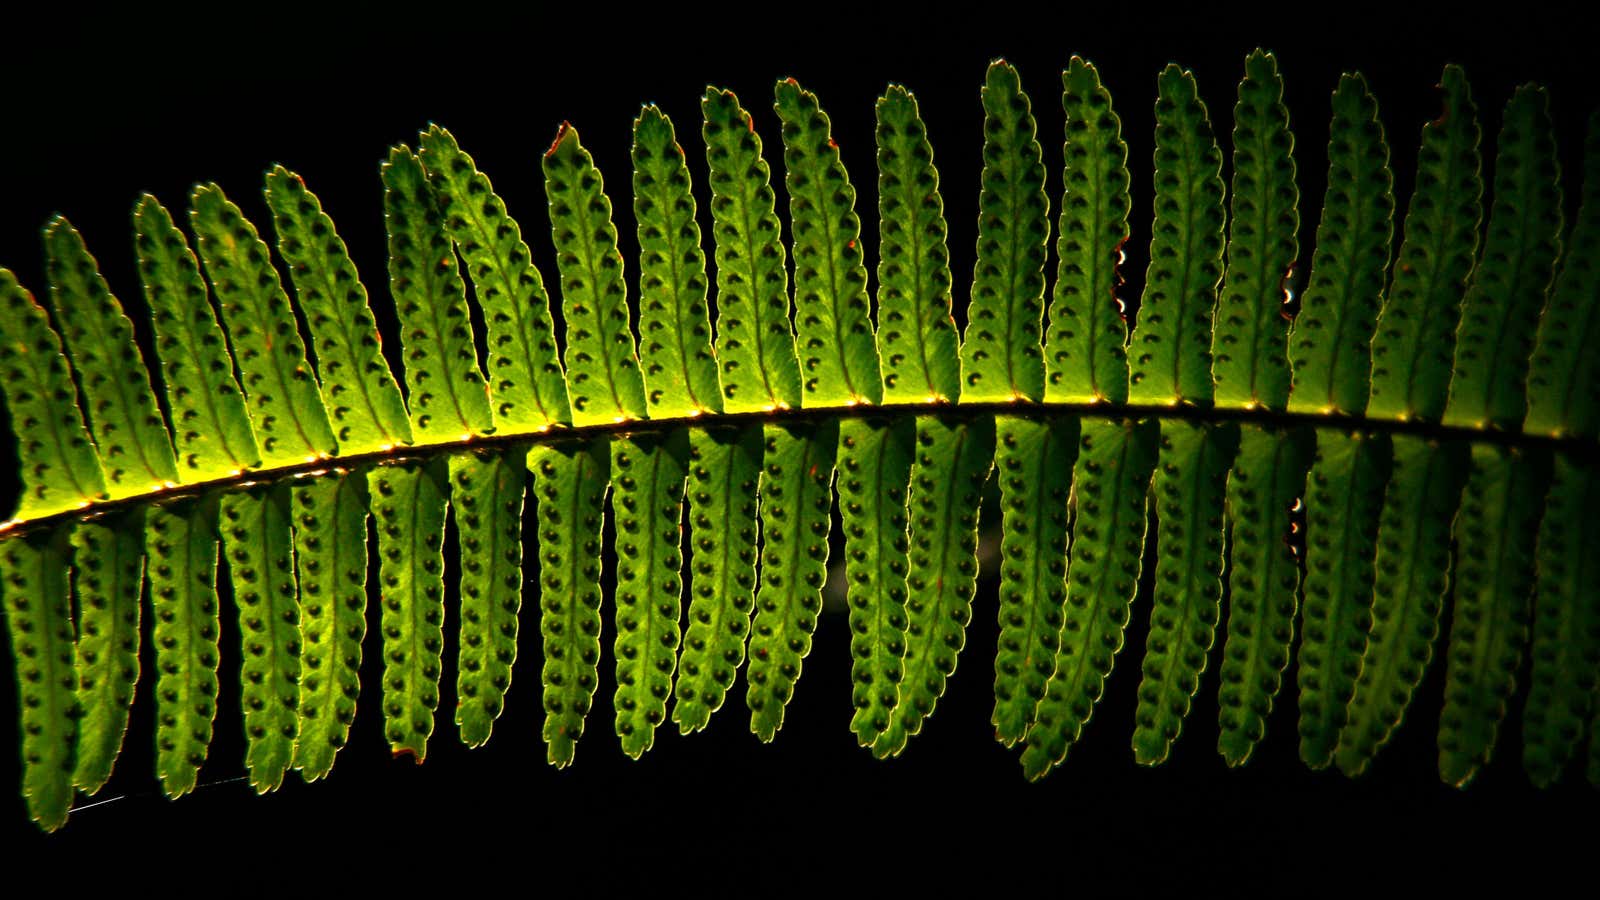 A young fern is lit by a ray of sunlight as it grows under the shadow of a pine tree in Encinitas California March 28, 2007.  REUTERS/Mike Blake  (UNITED STATES) – GM1DUXOQJLAA